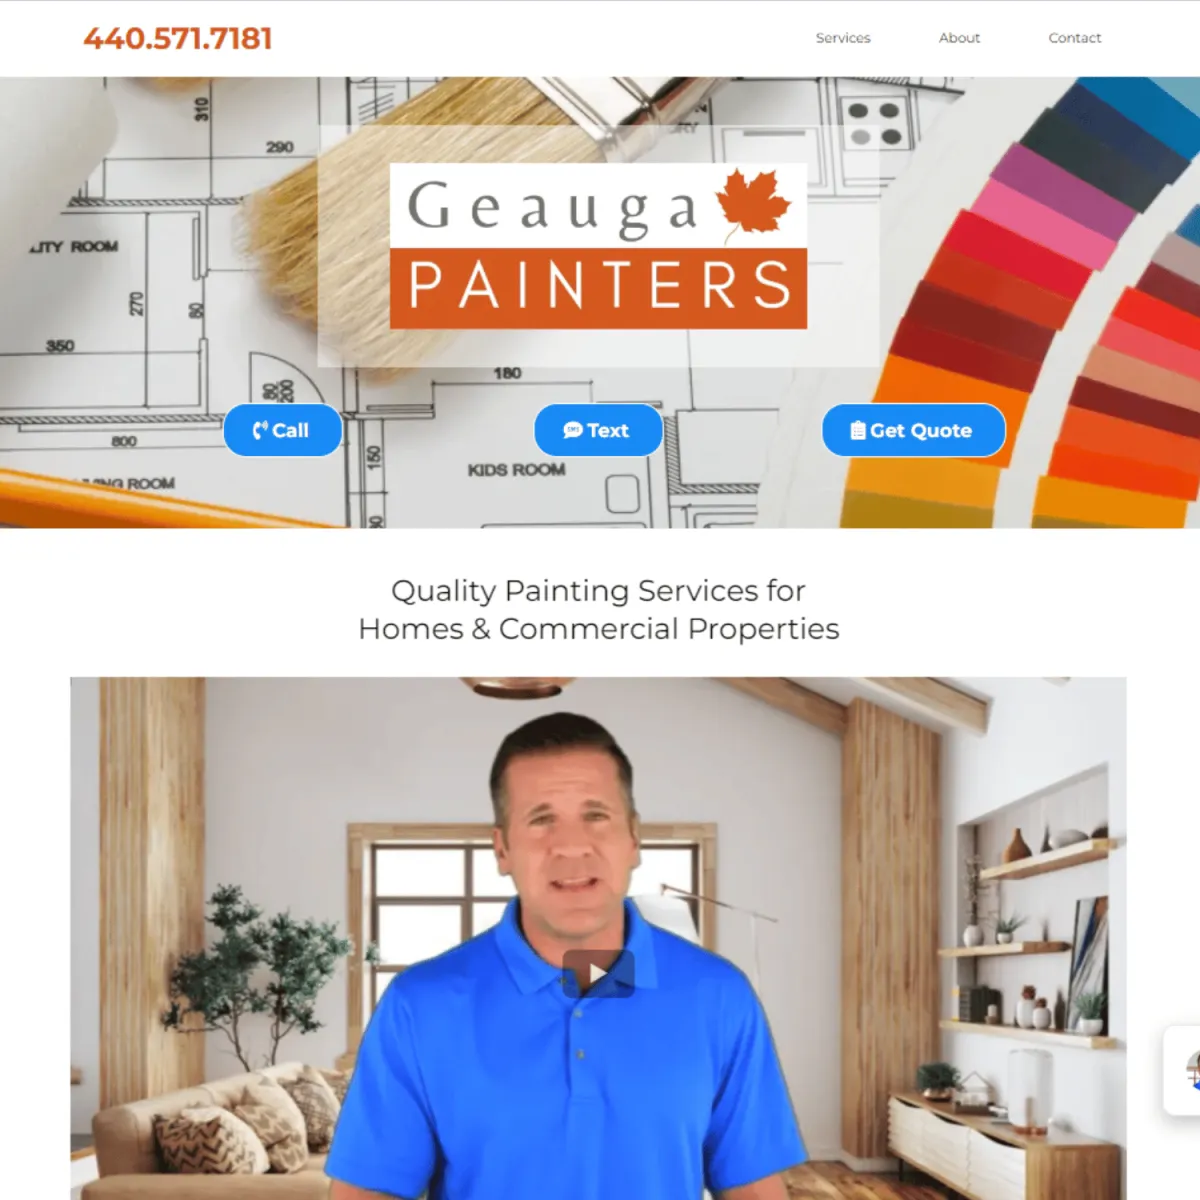 Geauga Painters Website Example